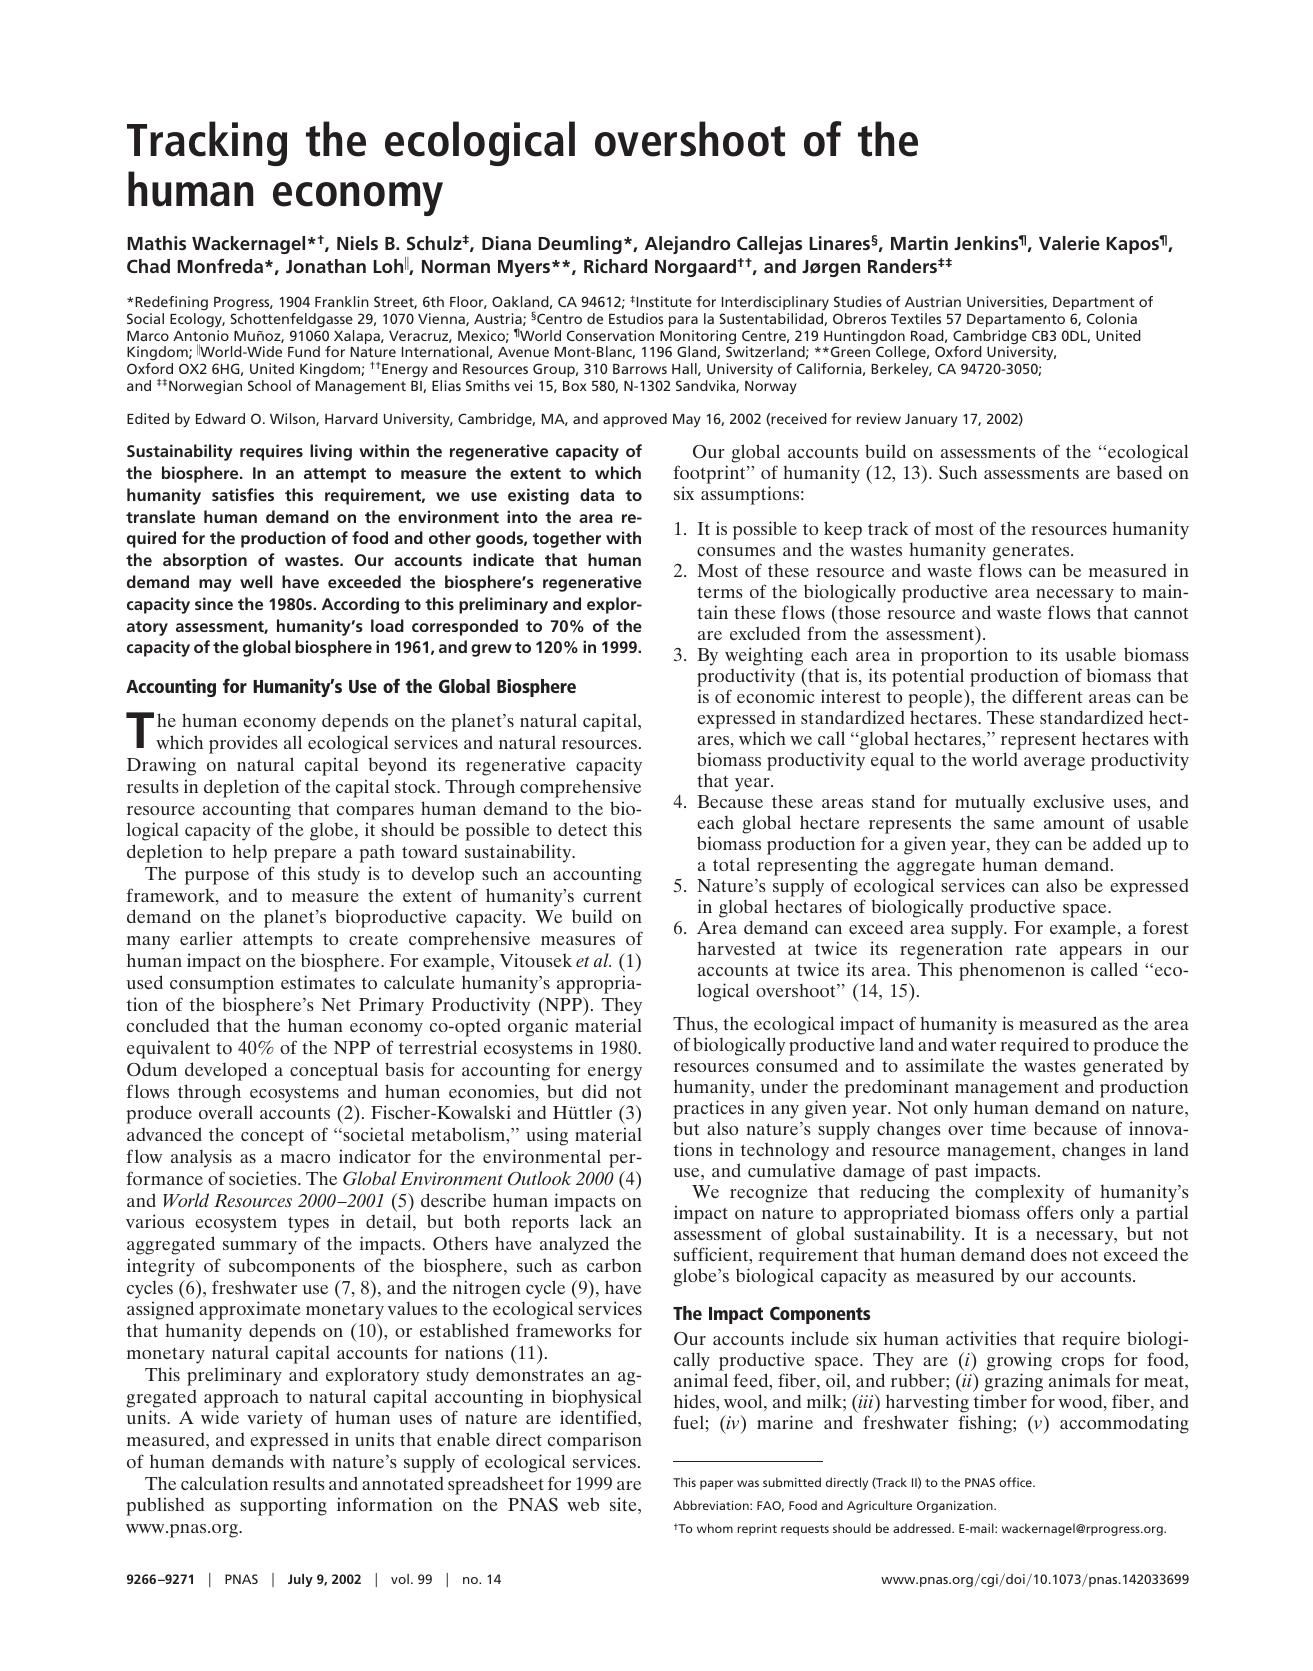 Tracking the ecological overshoot of the human economy, 2002